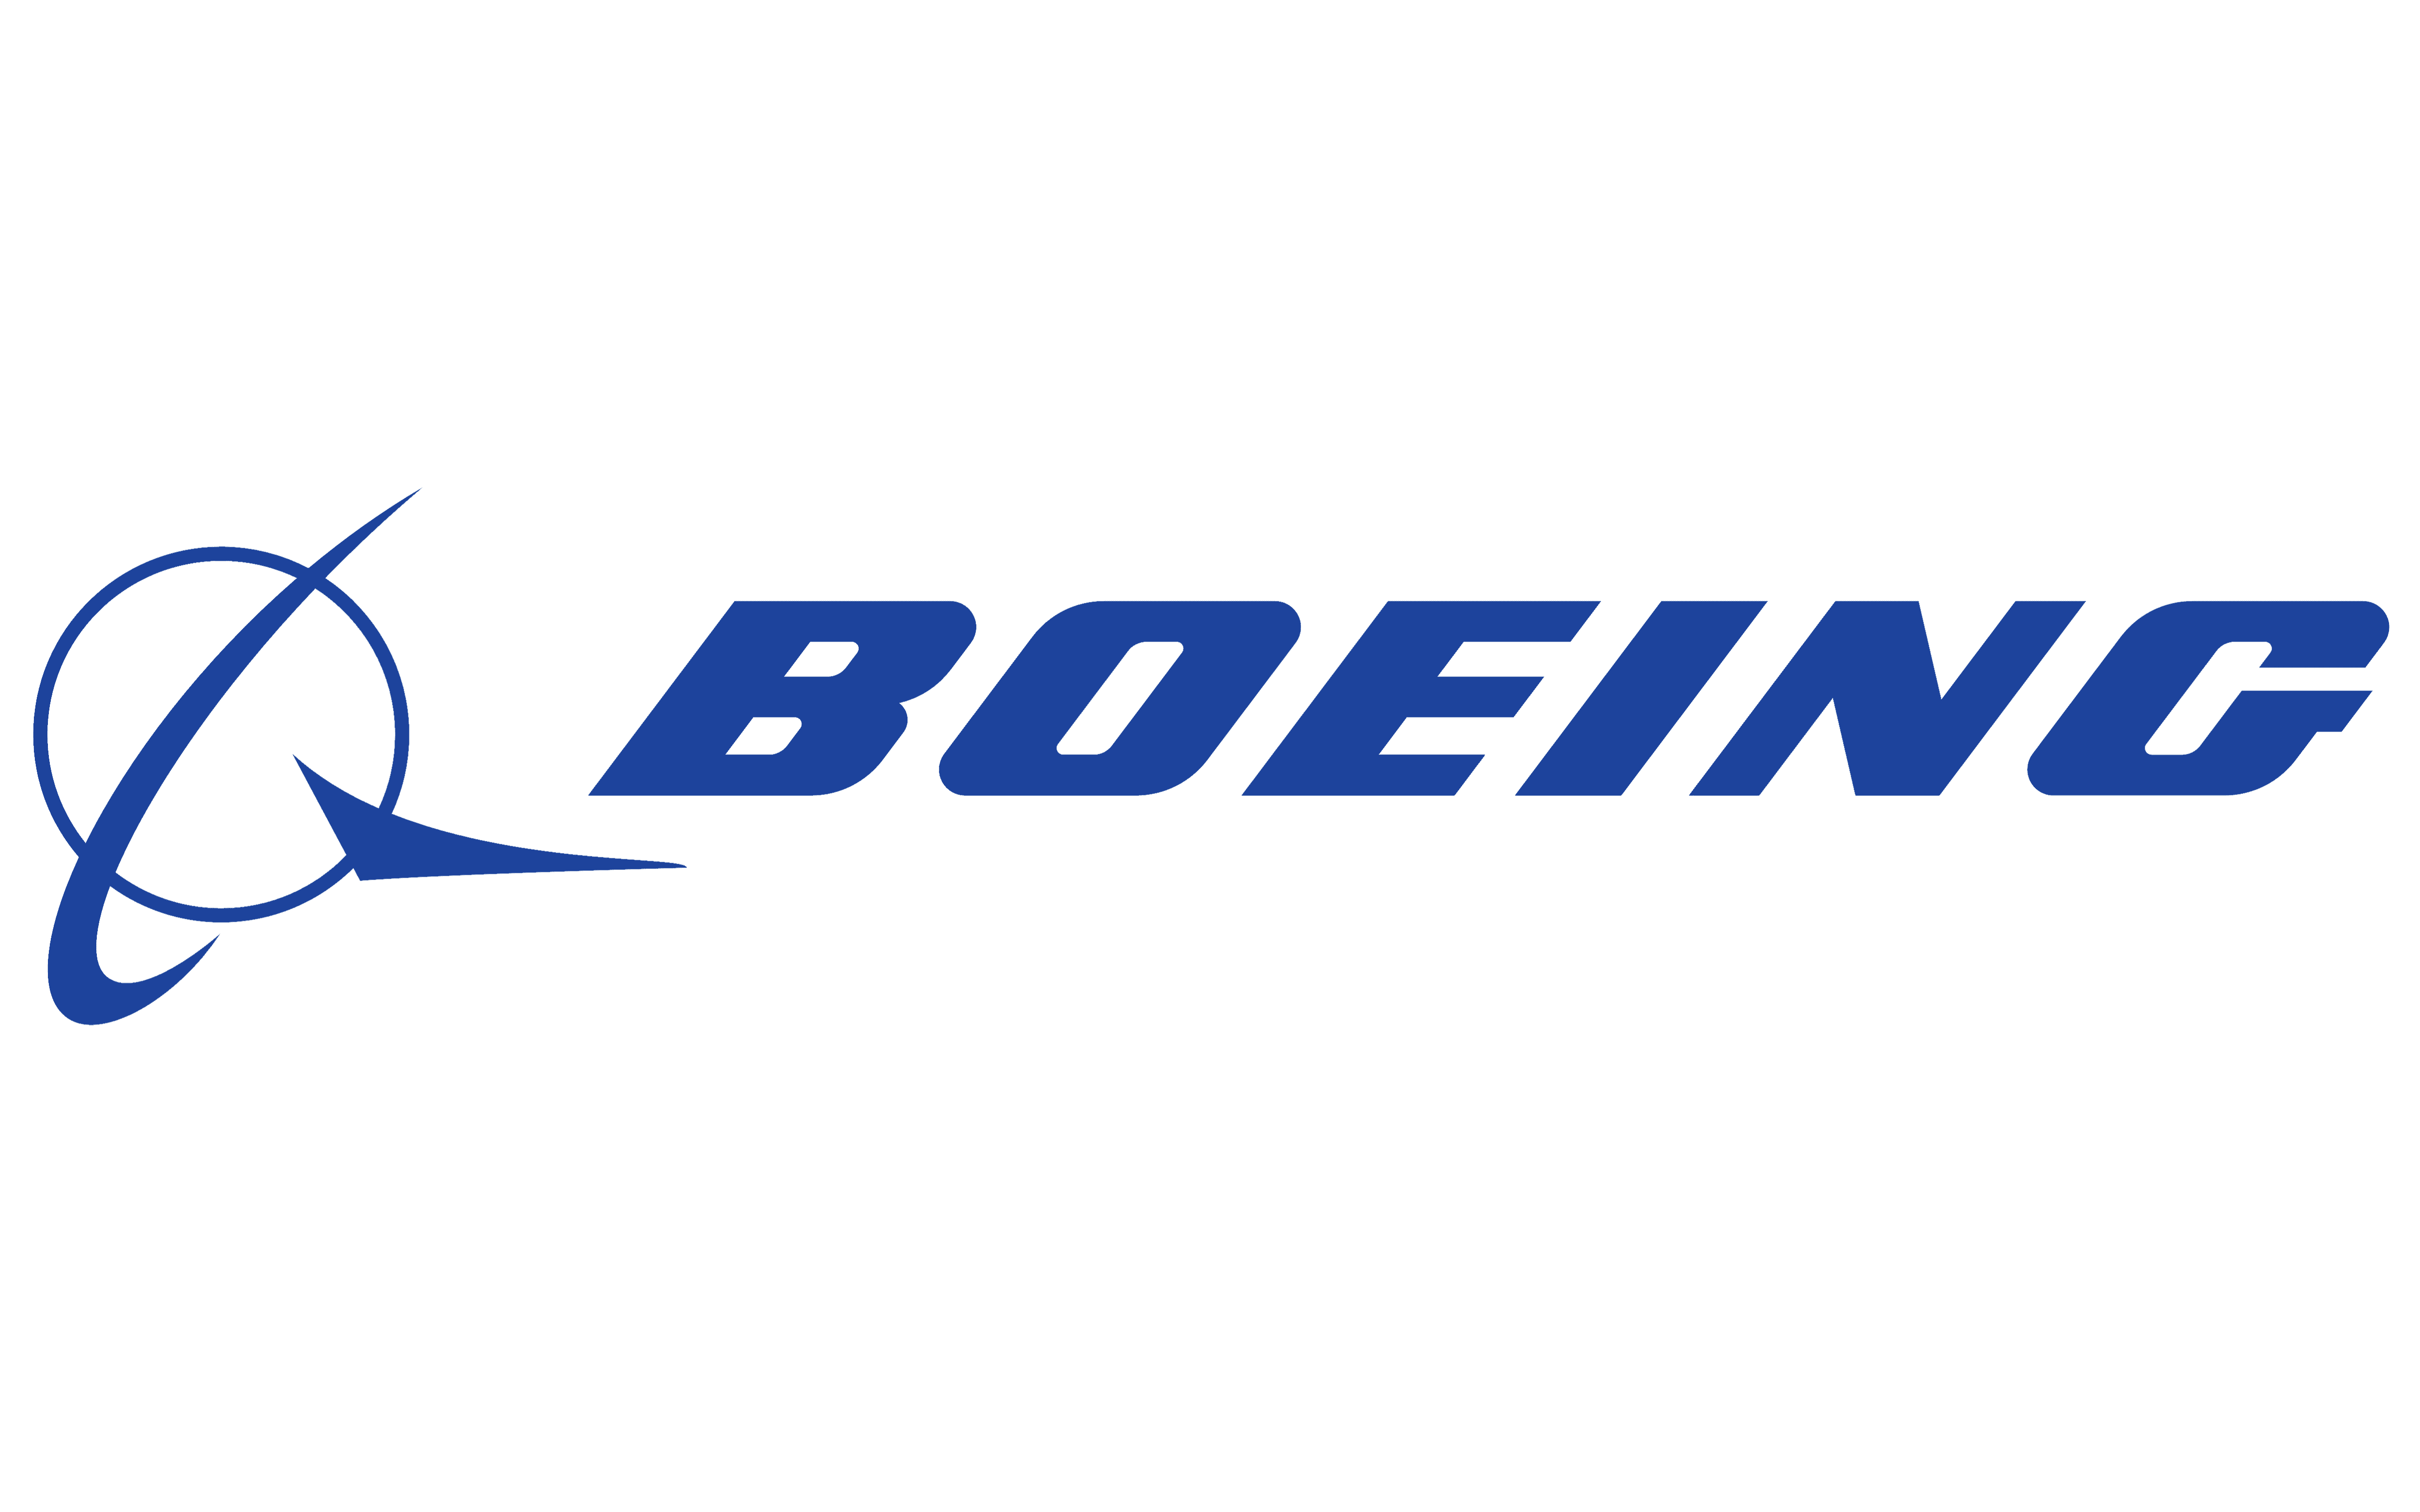 Boeing Logo PNG Picture